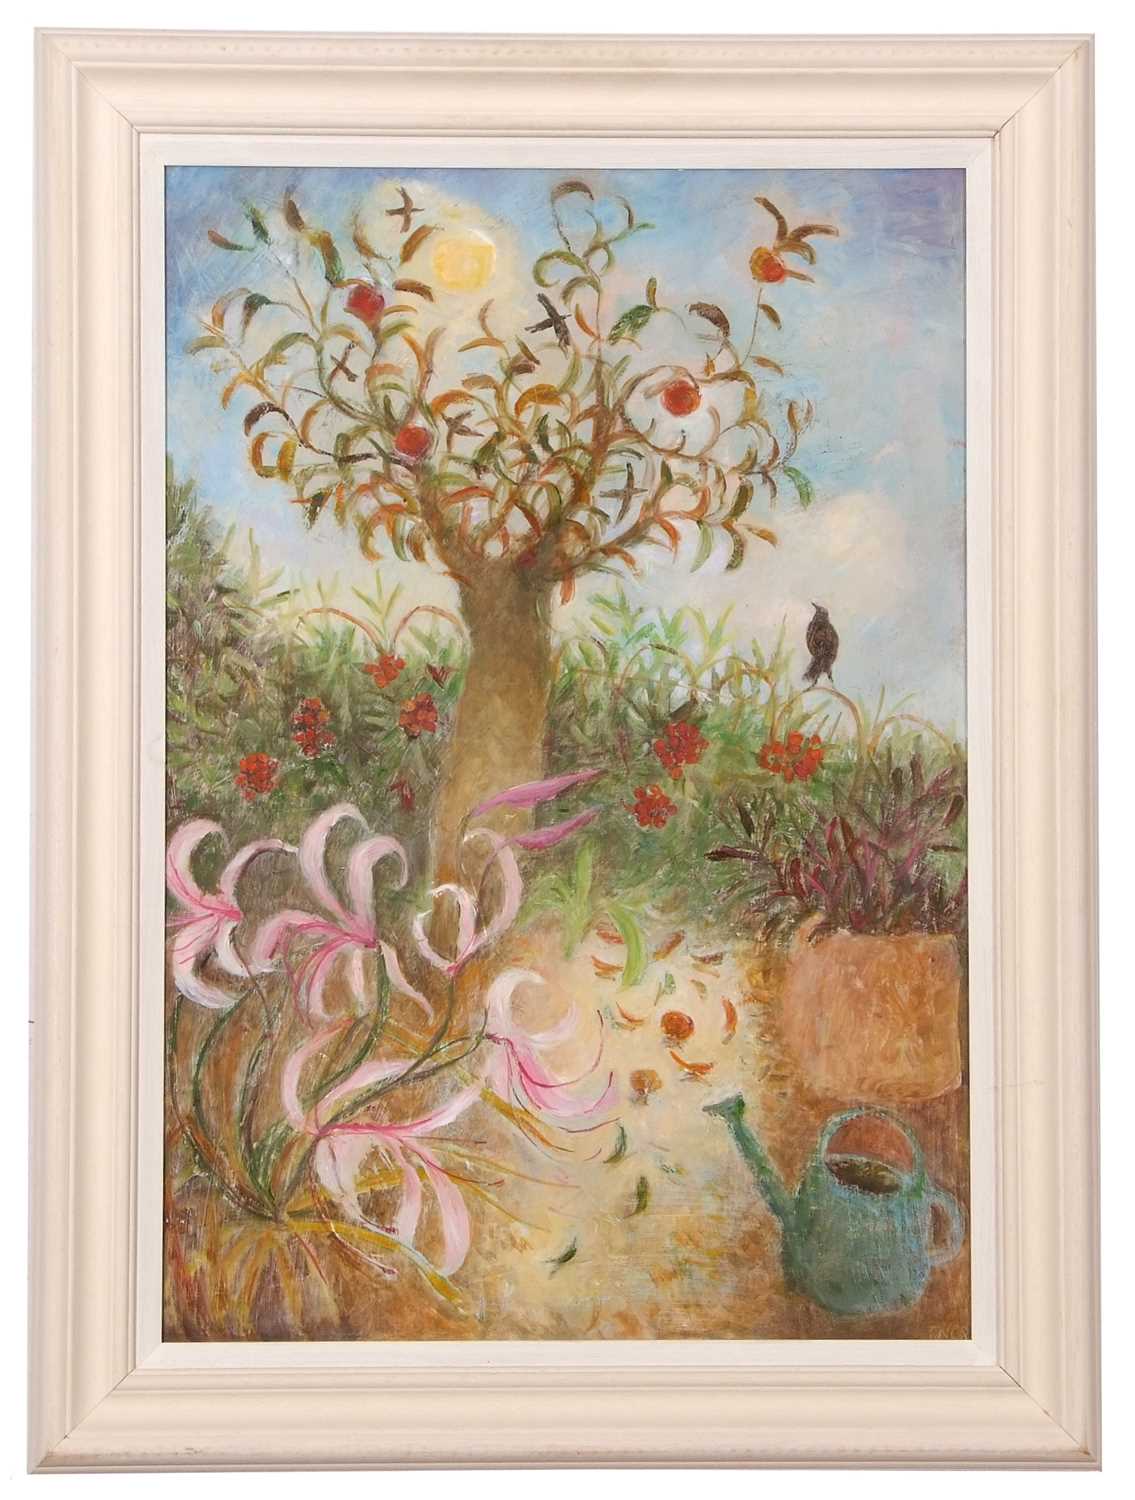 Tessa Newcomb (b.1955), Sunlit floral garden with an apple tree and birds, oil on board, signed